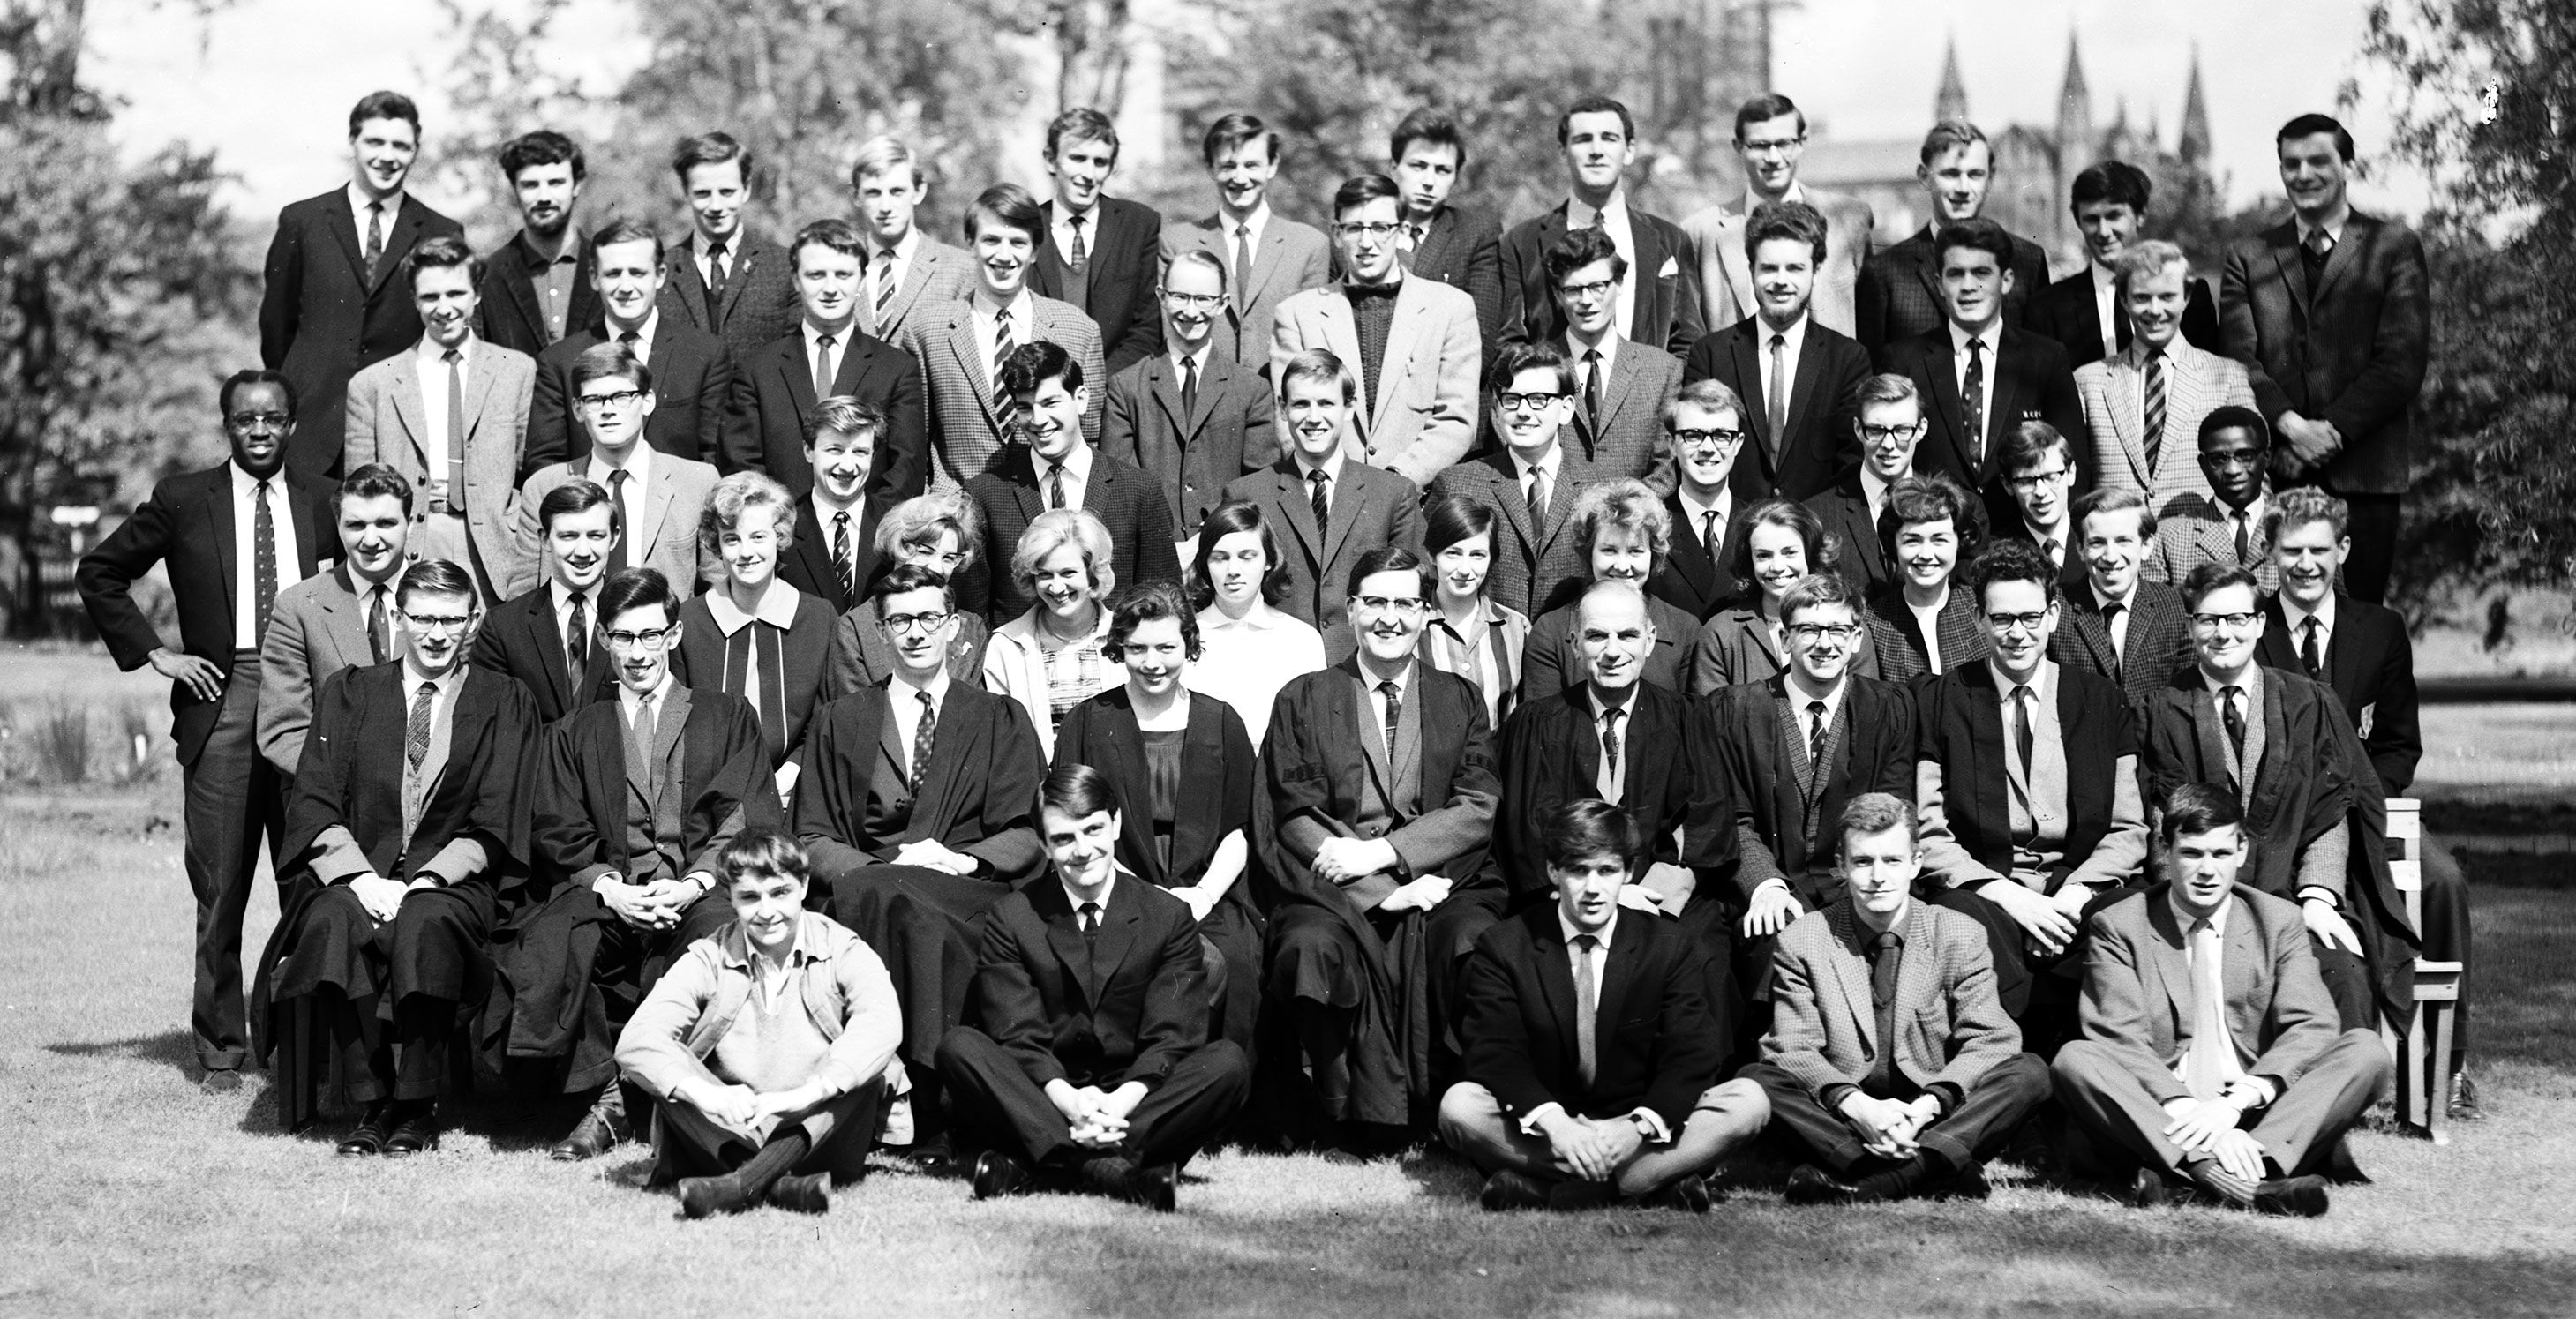 Geography Department Undergraduate Group photo from 1964